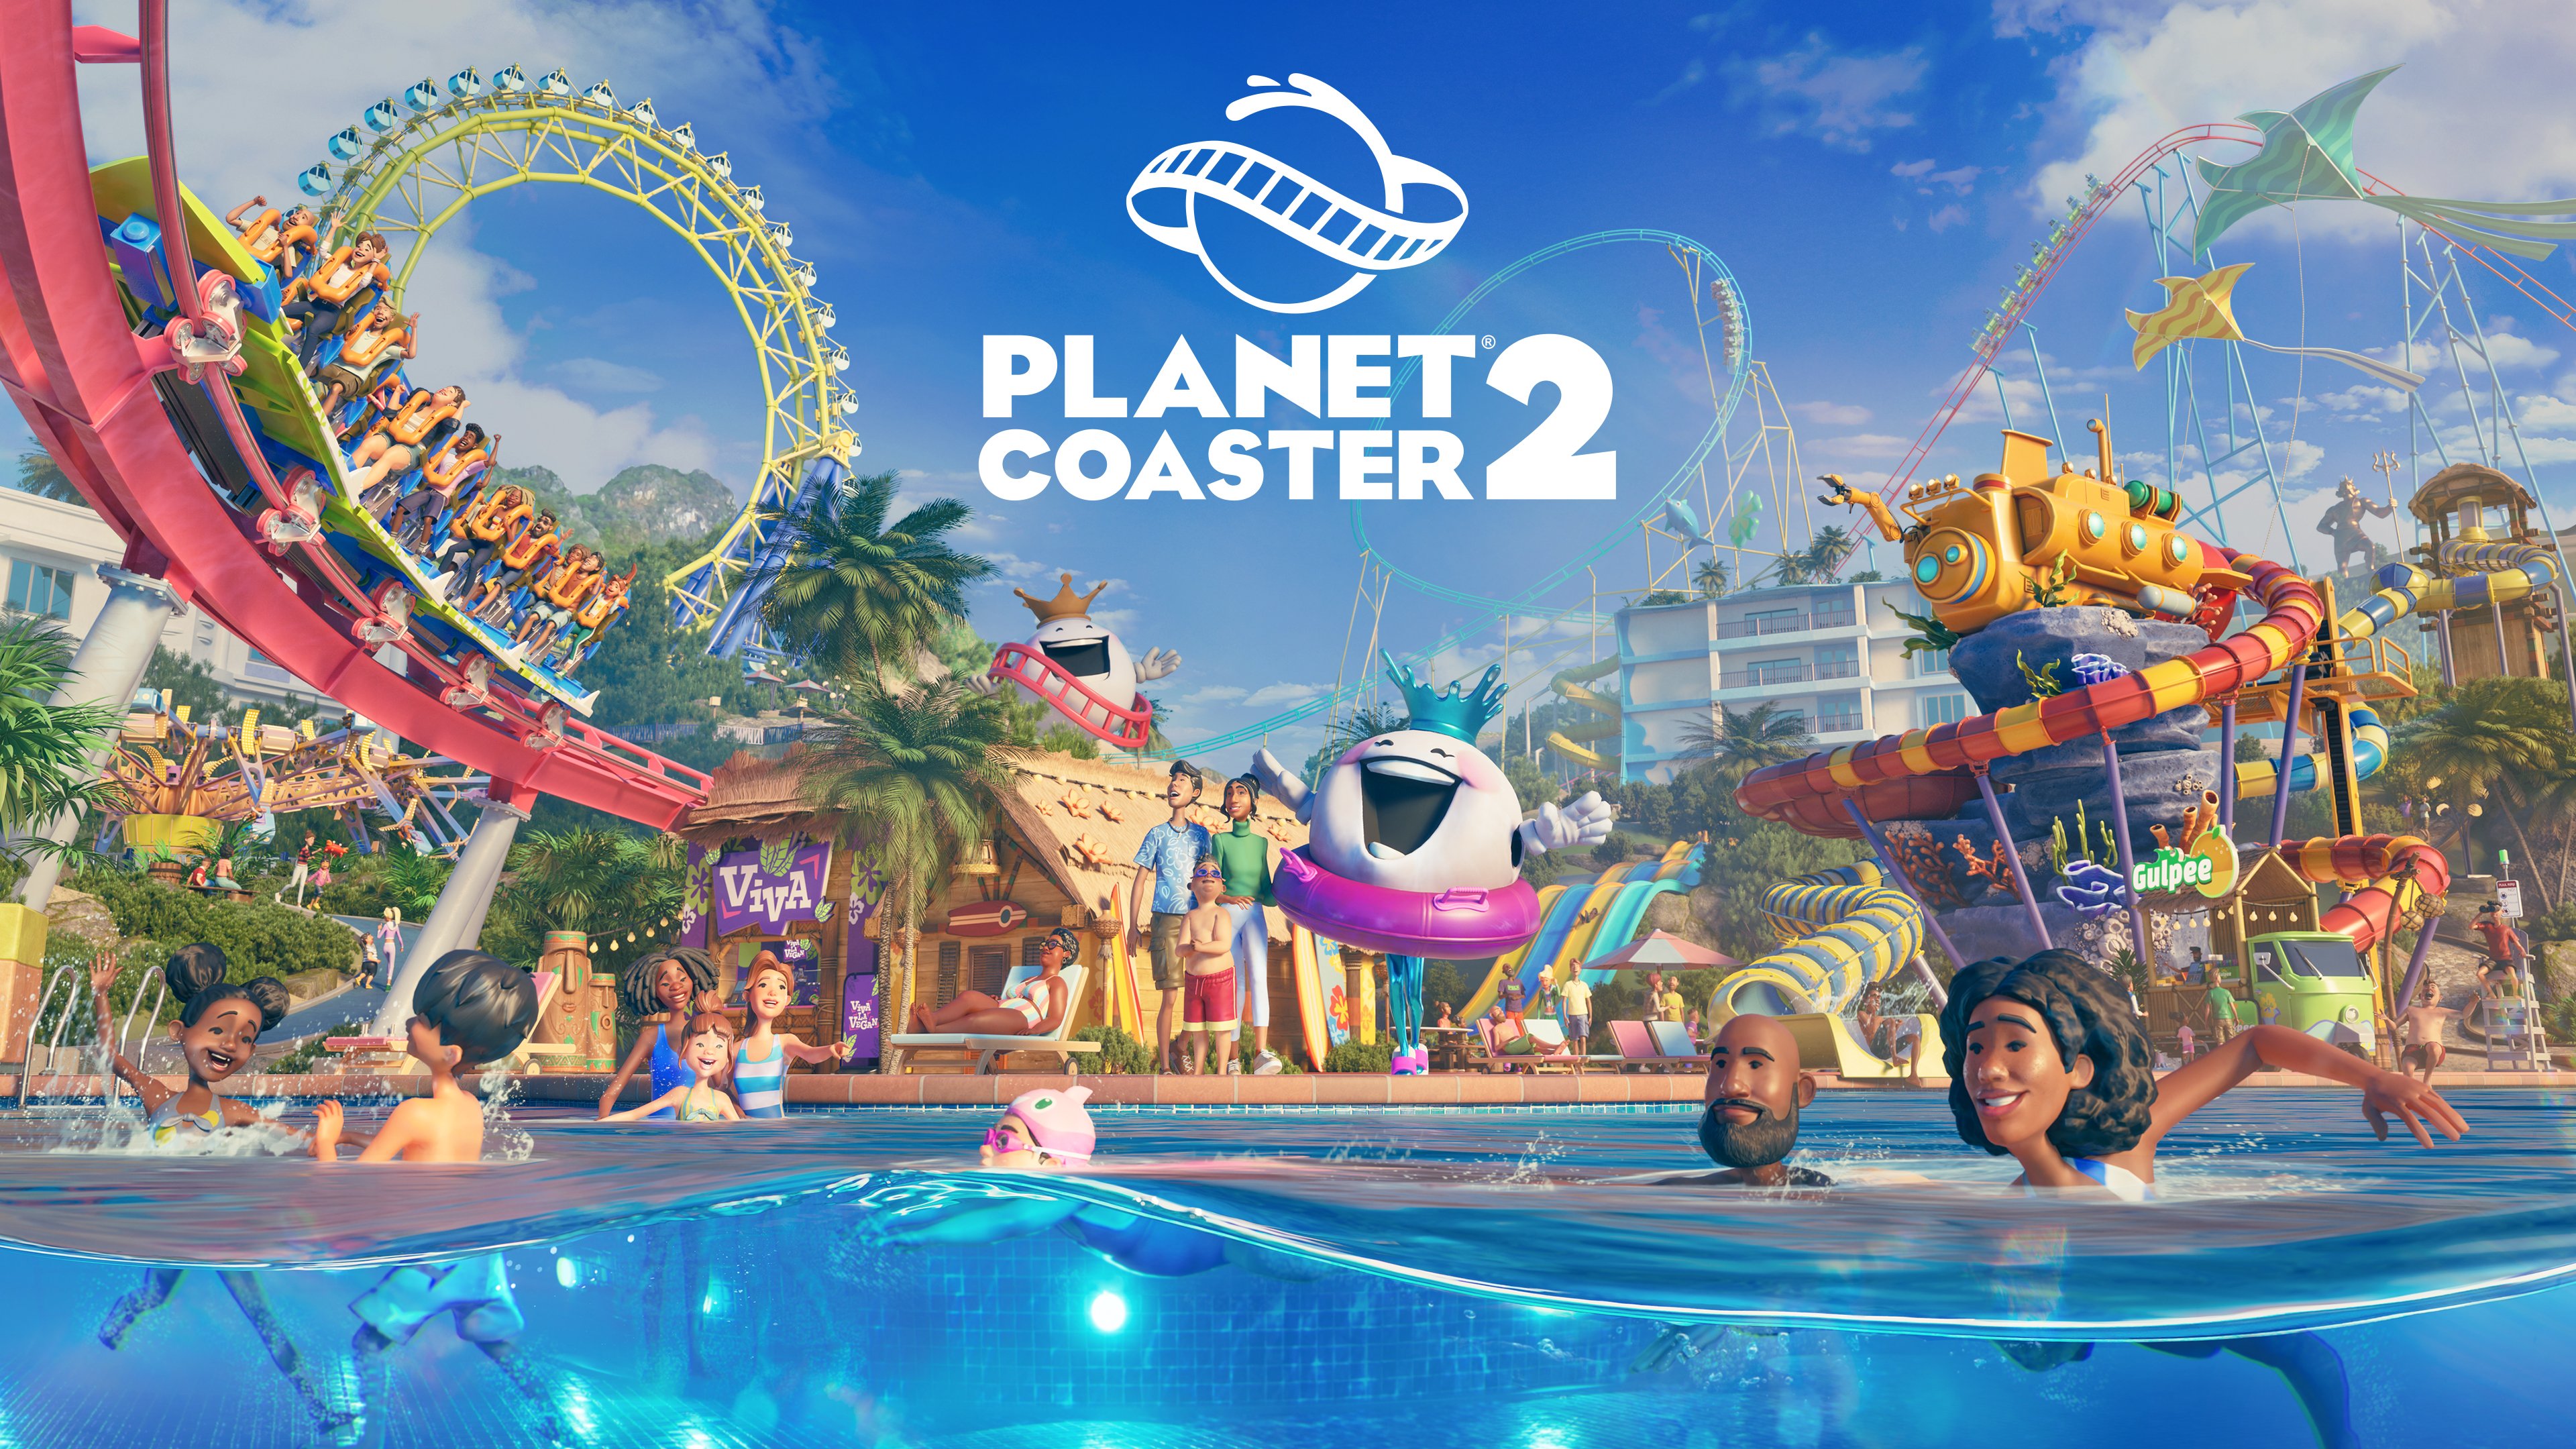 Planet Coaster 2 announced for PS5, Xbox Series and PC